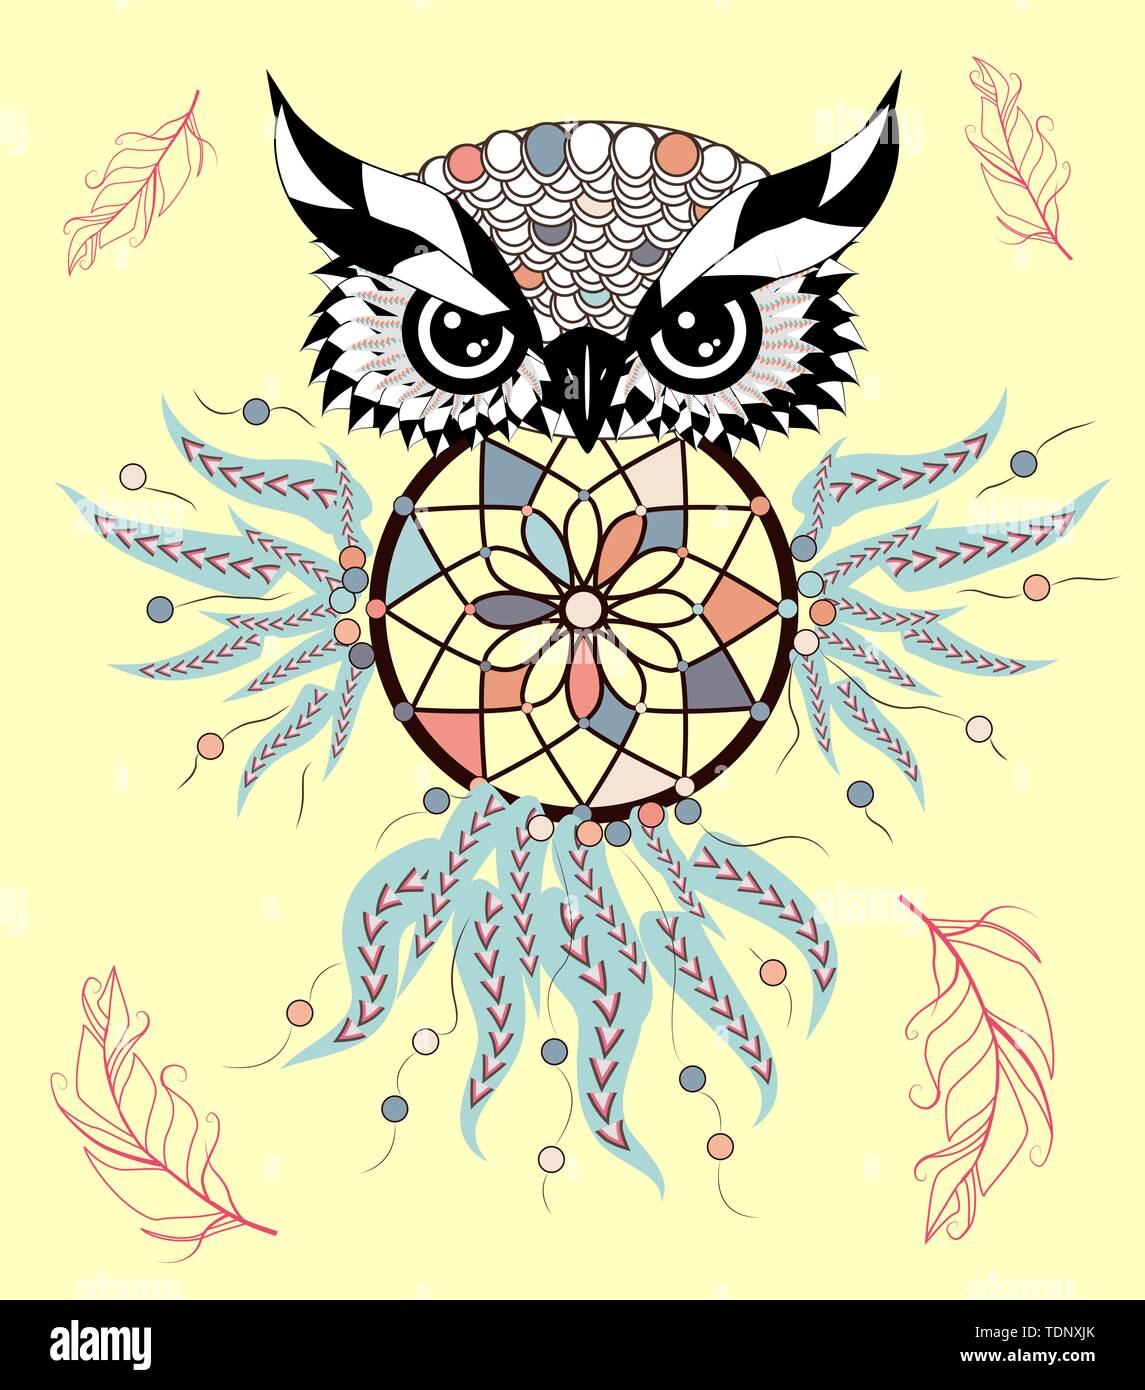 Owl with dreamcatcher black and white Flying owl with american native  indians dreamcatcher black and white tattoo style  CanStock